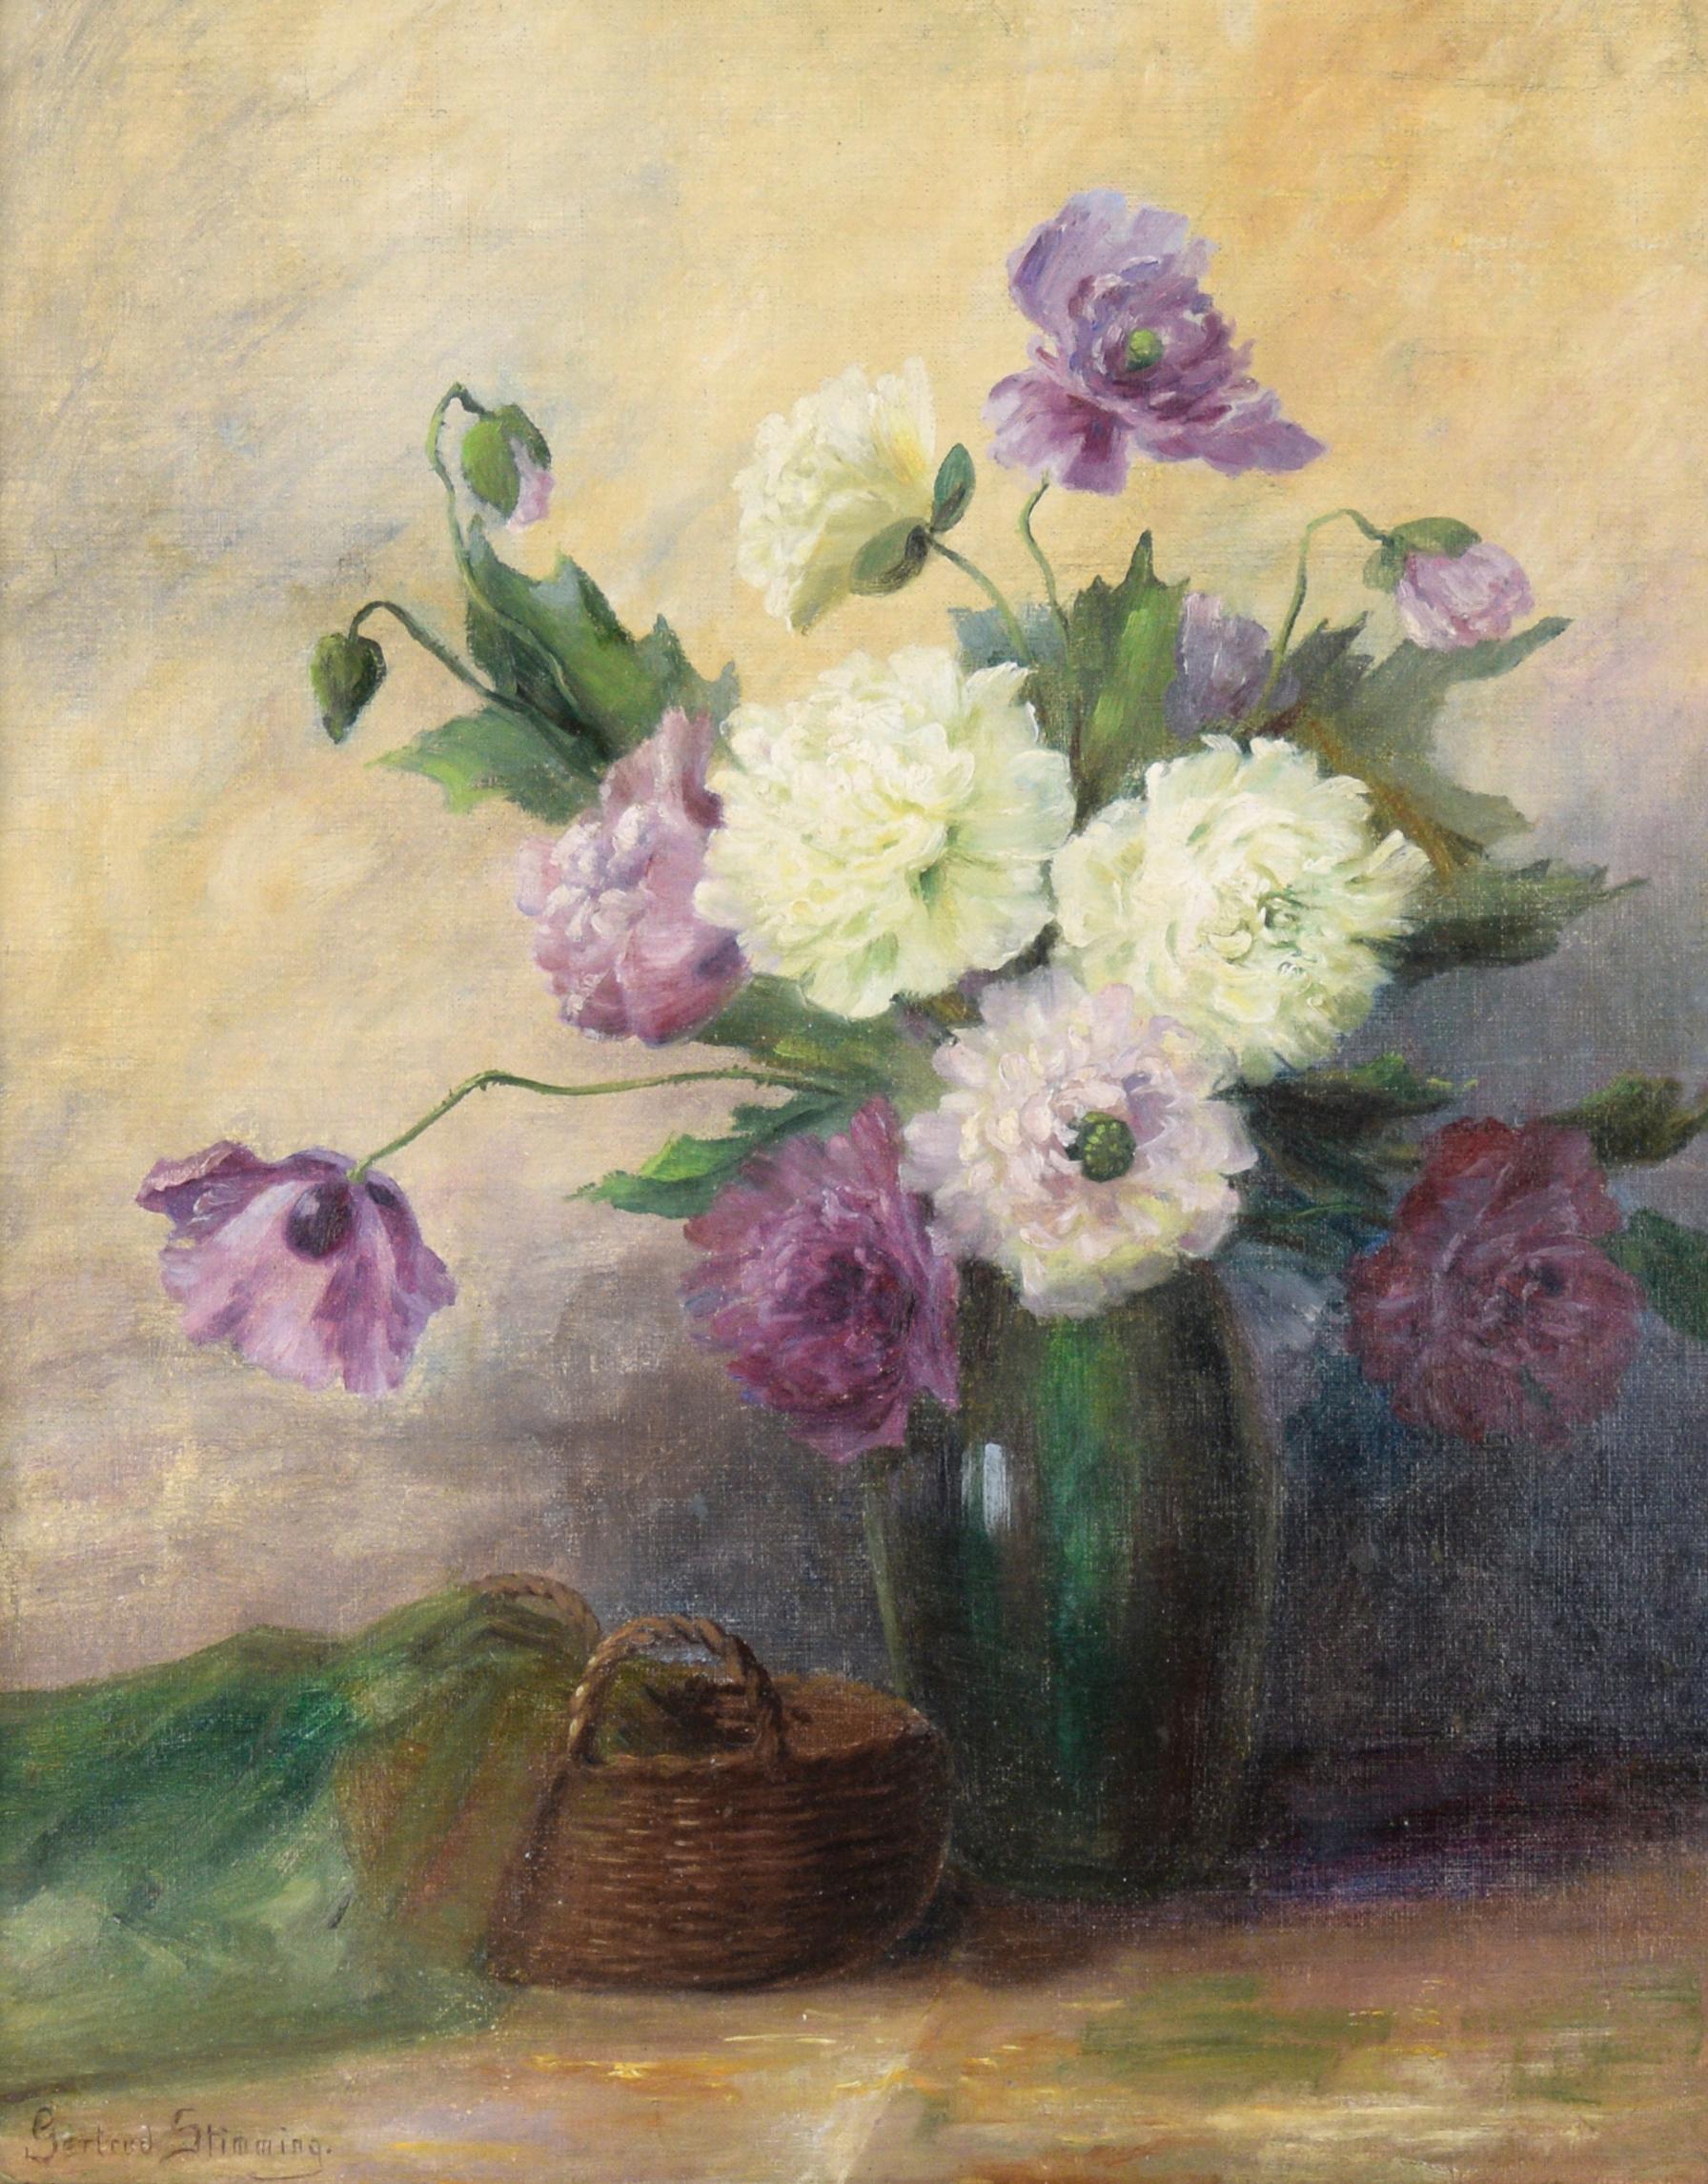 White and Purple Dahlias Floral Still Life in Oil on Linen on Illustration Board - Painting by Gertrud Stimming